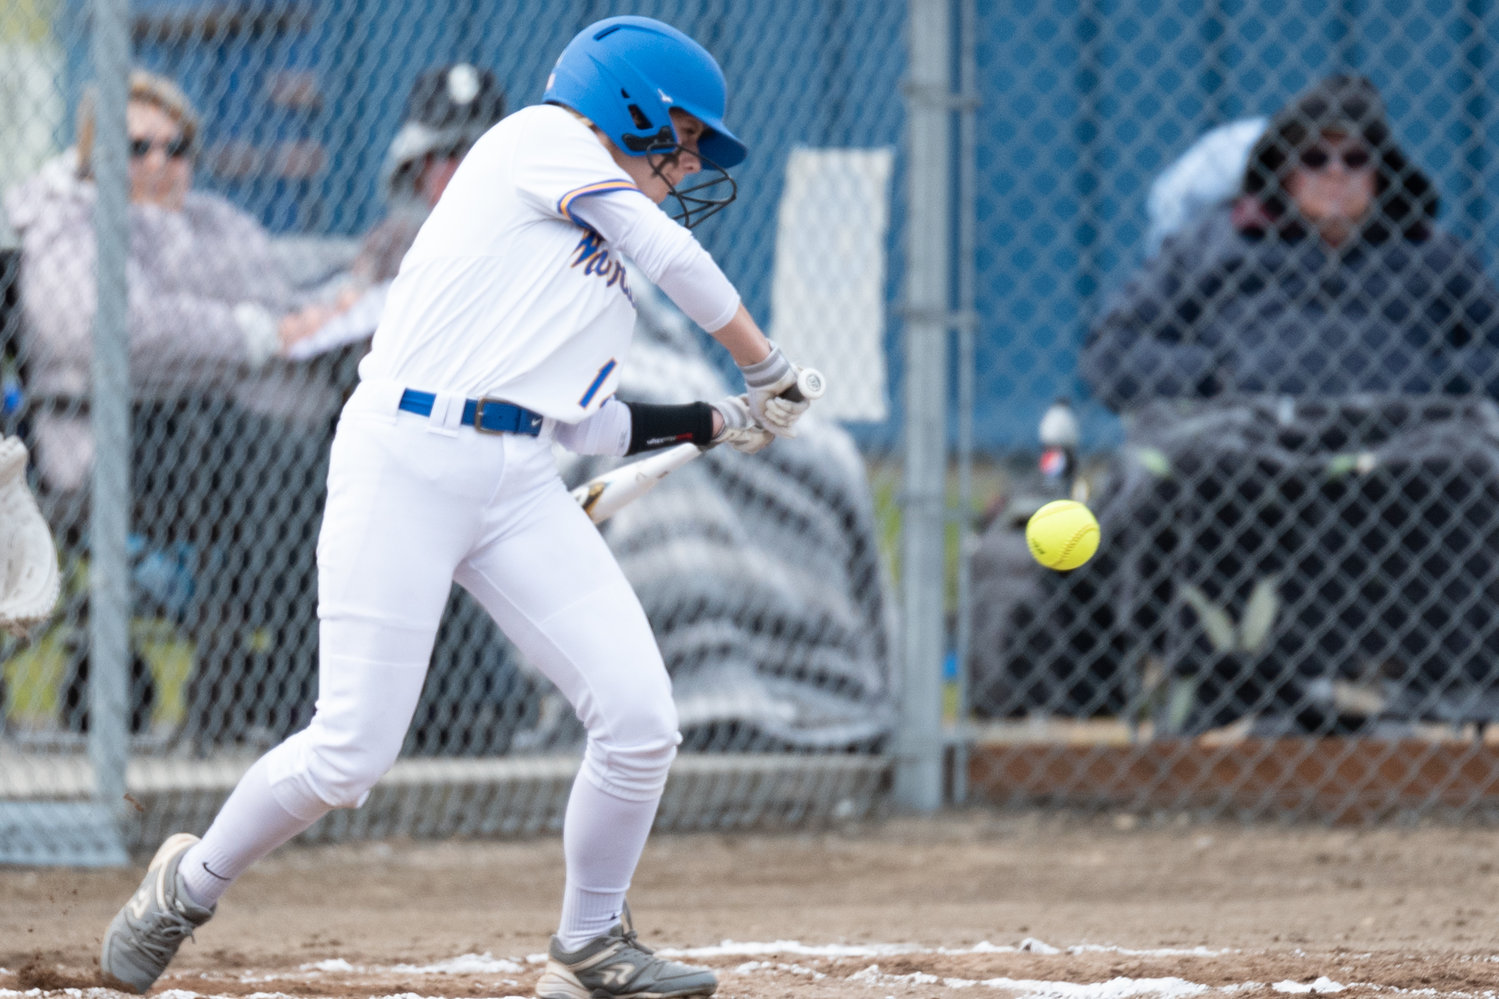 Rochester's Cheyenne Justice swings at a pitch against W.F. West April 29.